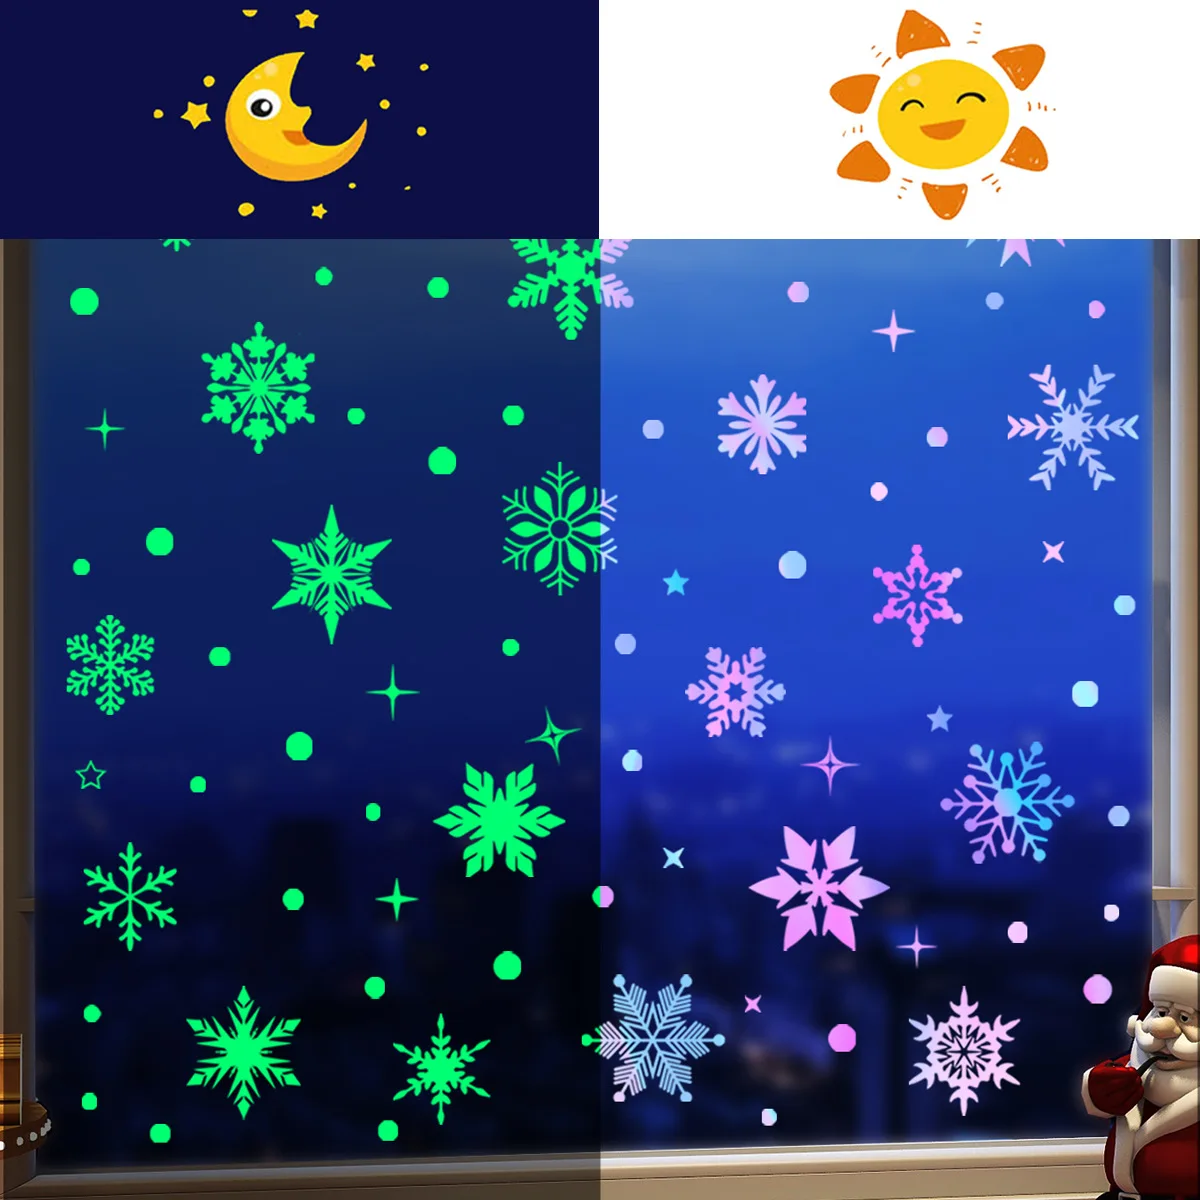 3pcs Colorful Luminous Snowflake Wall Stickers Glass Window Decorative Wall Stickers Christmas Wall Stickers Wallpapers Jdx8015 scjyrxs 3pcs window glass control button passenger back door electric lift switch 8kd959855a for a6 a7 a8 q3 4gd959855